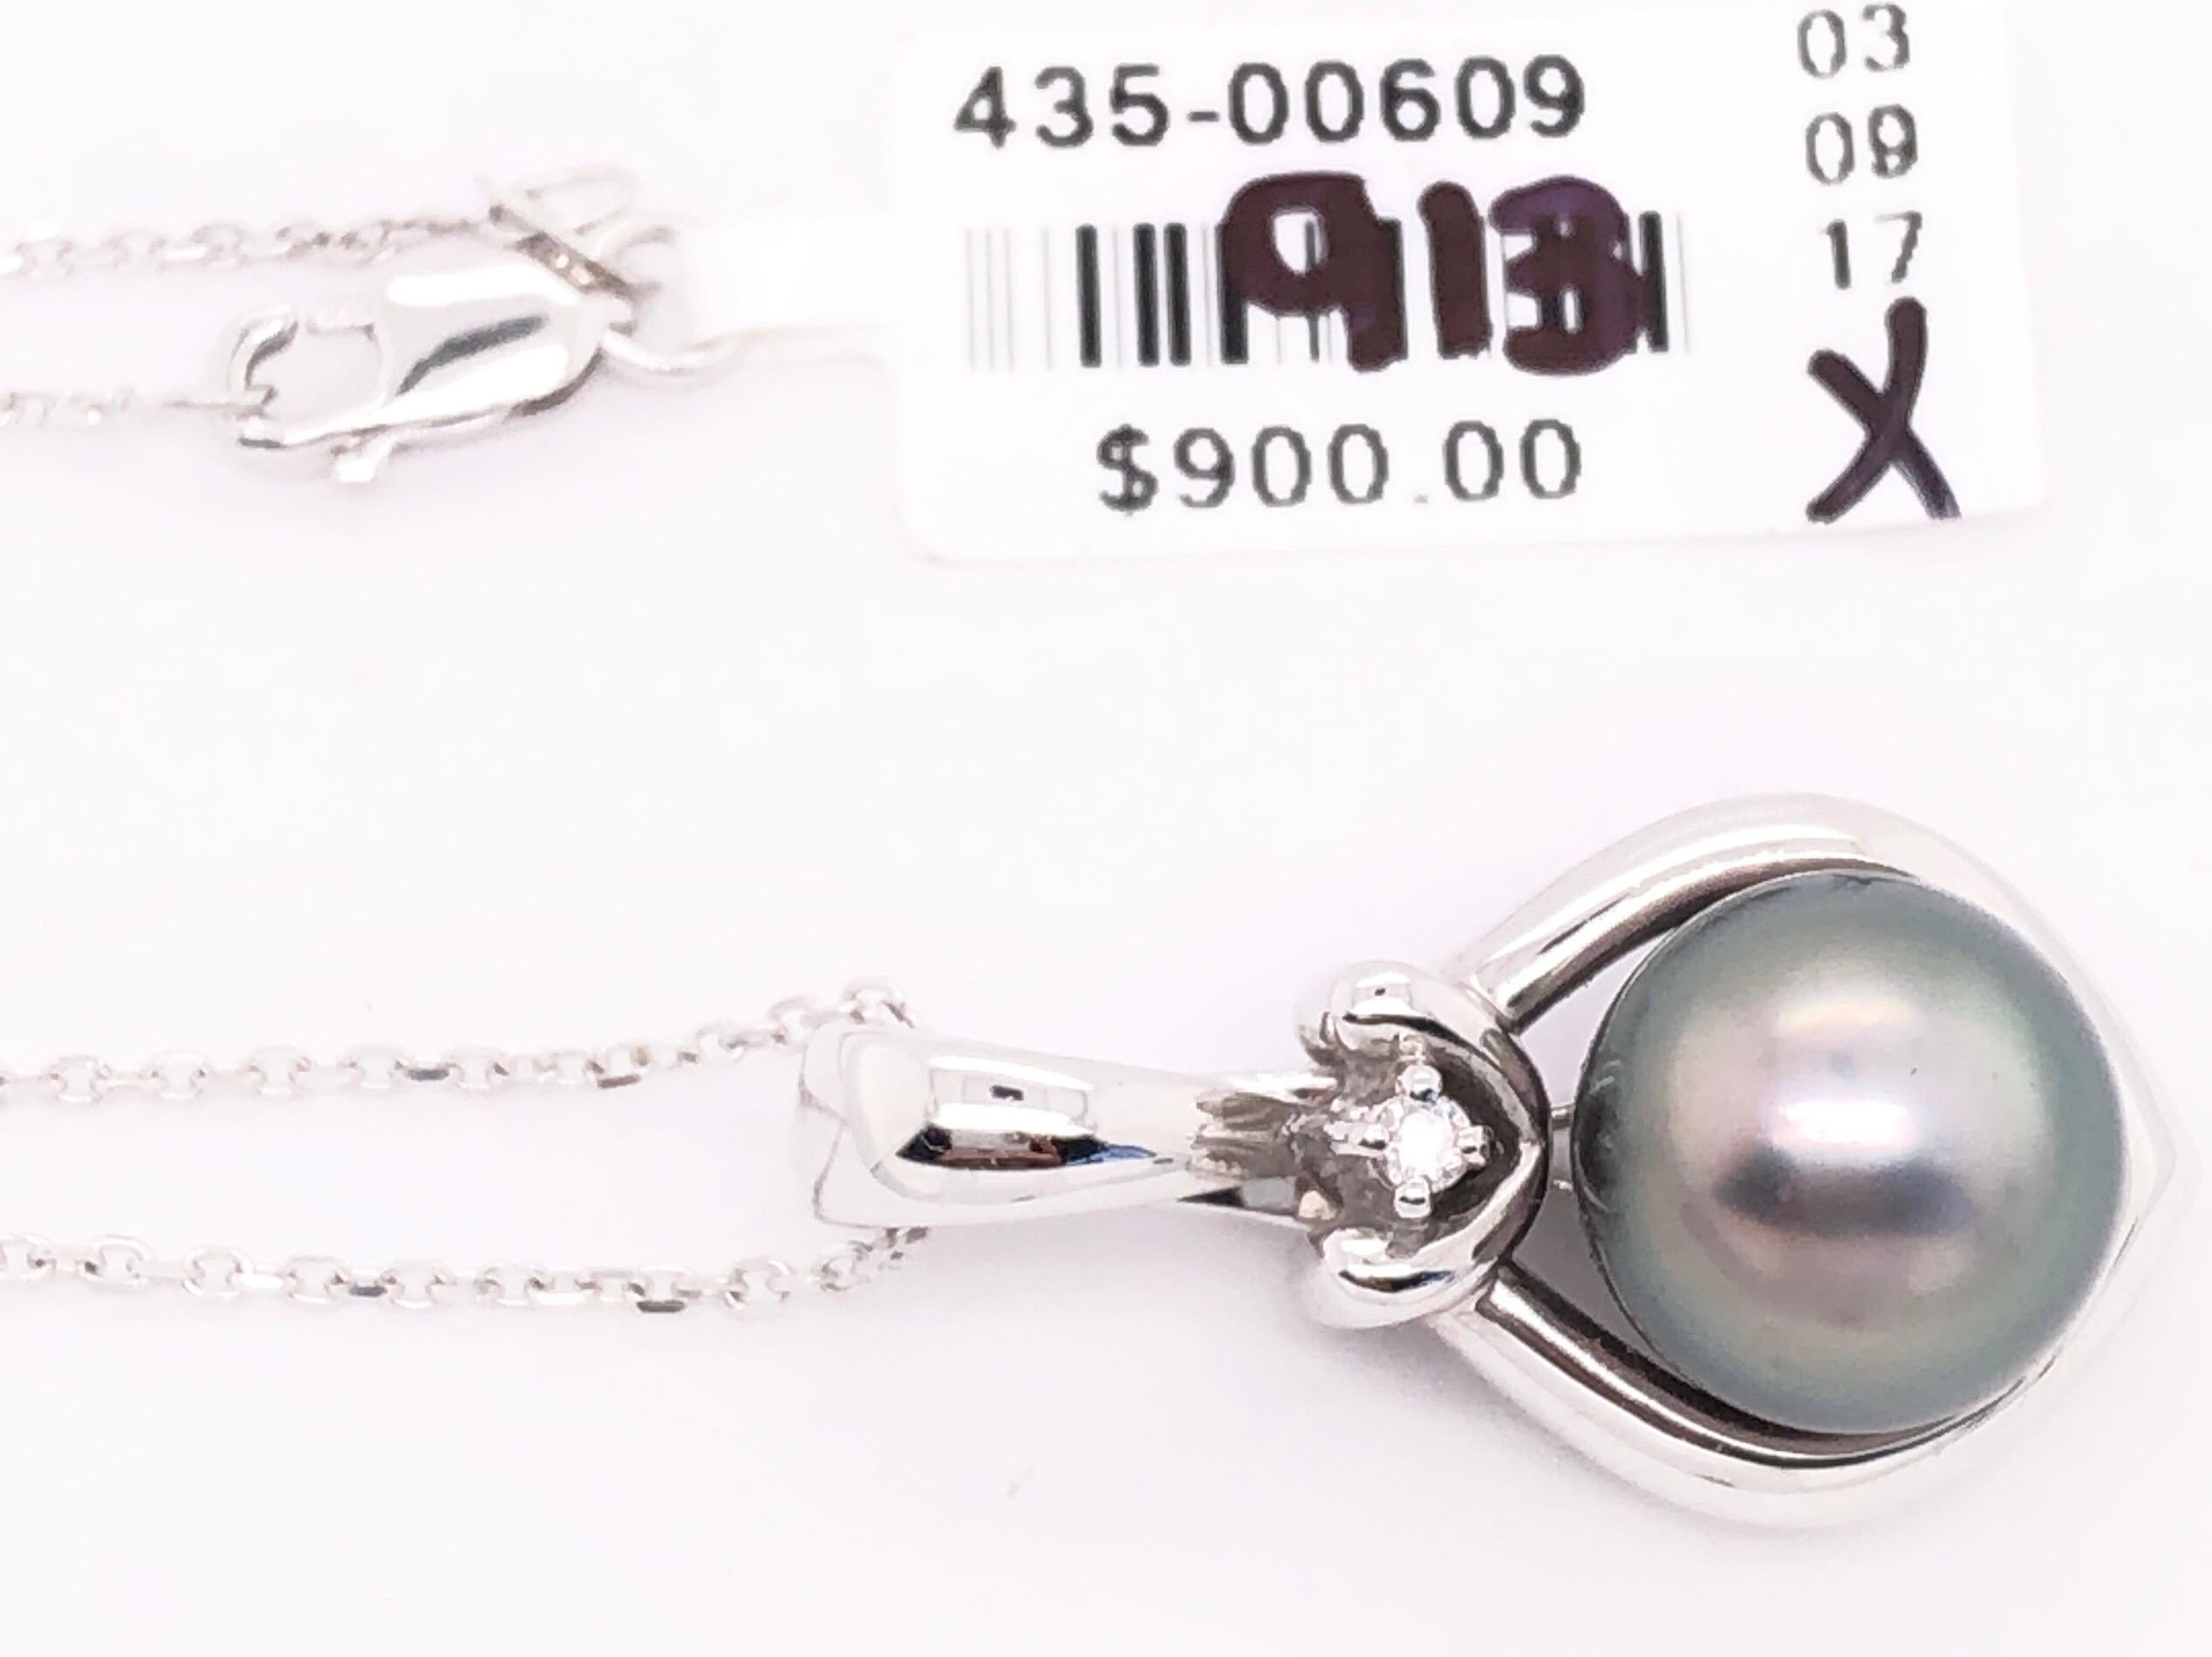 14 Karat White Gold Necklace with Cultured Pearl Diamond Pendant For Sale 2